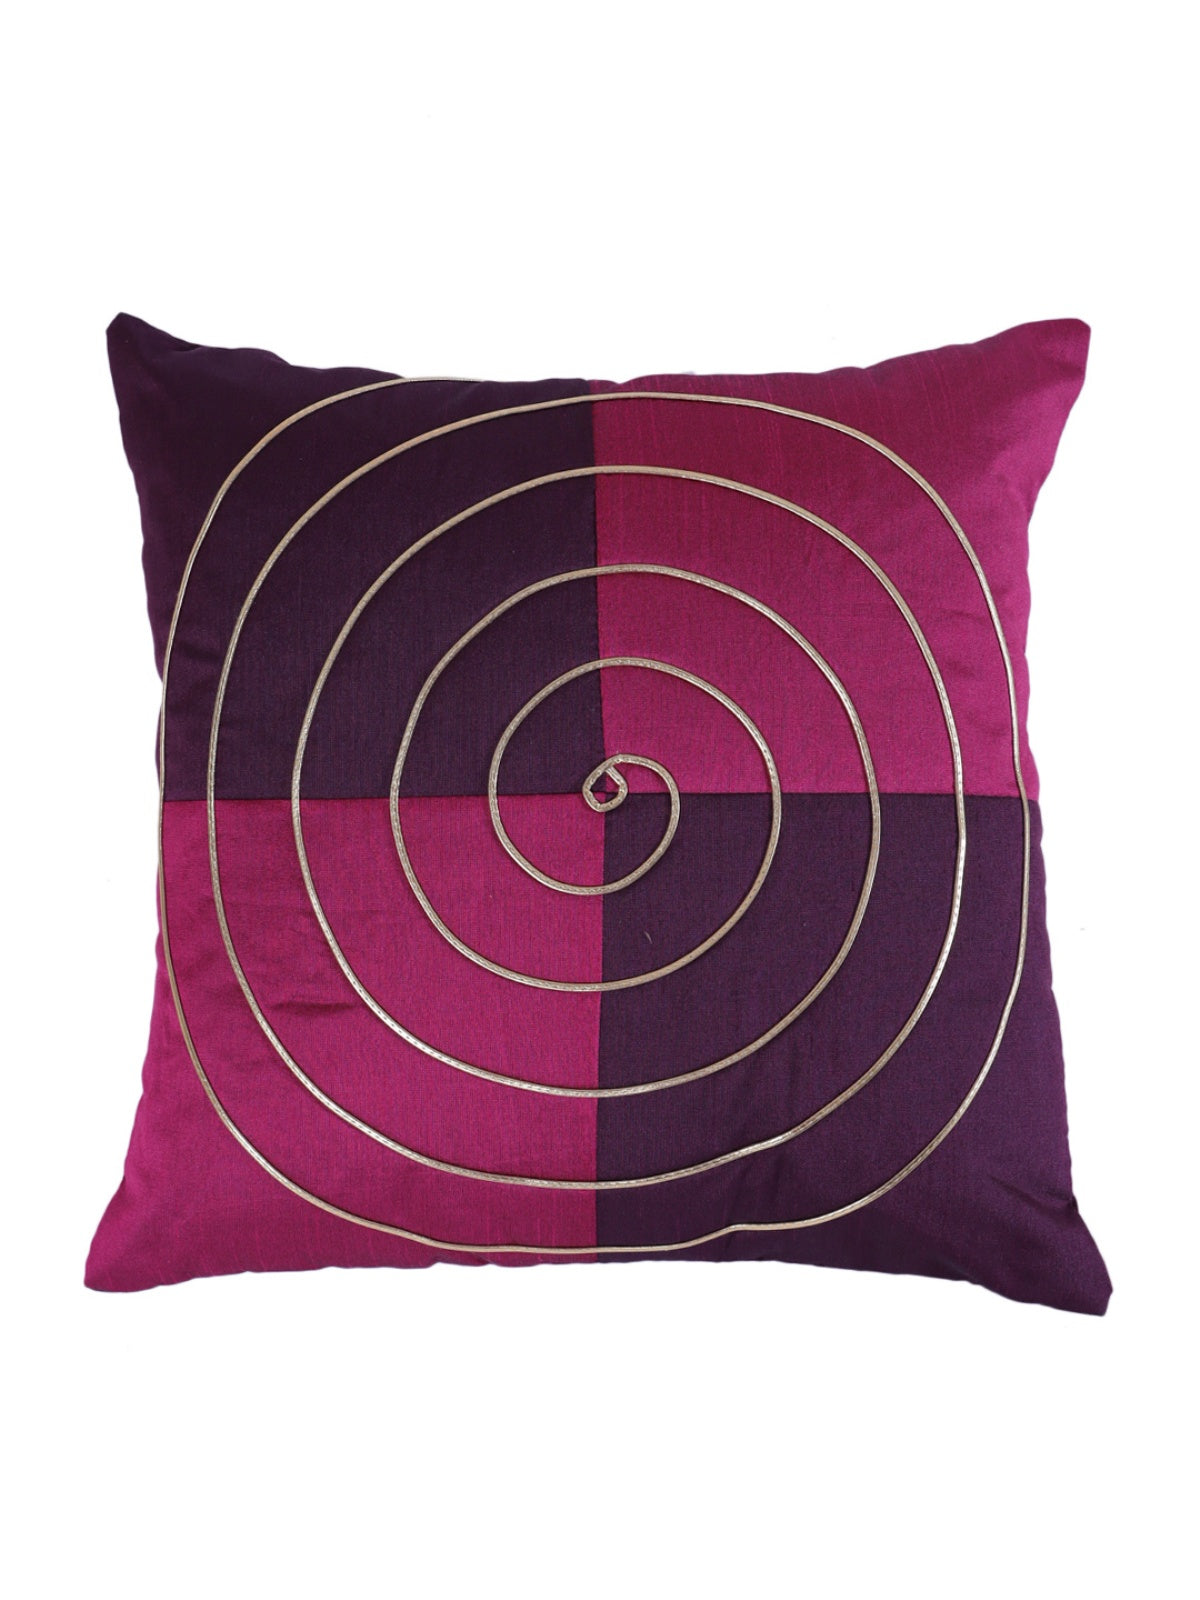 Polyester Geometric Design Cushion Covers 16x16 Inches, Set of 5 - Purple